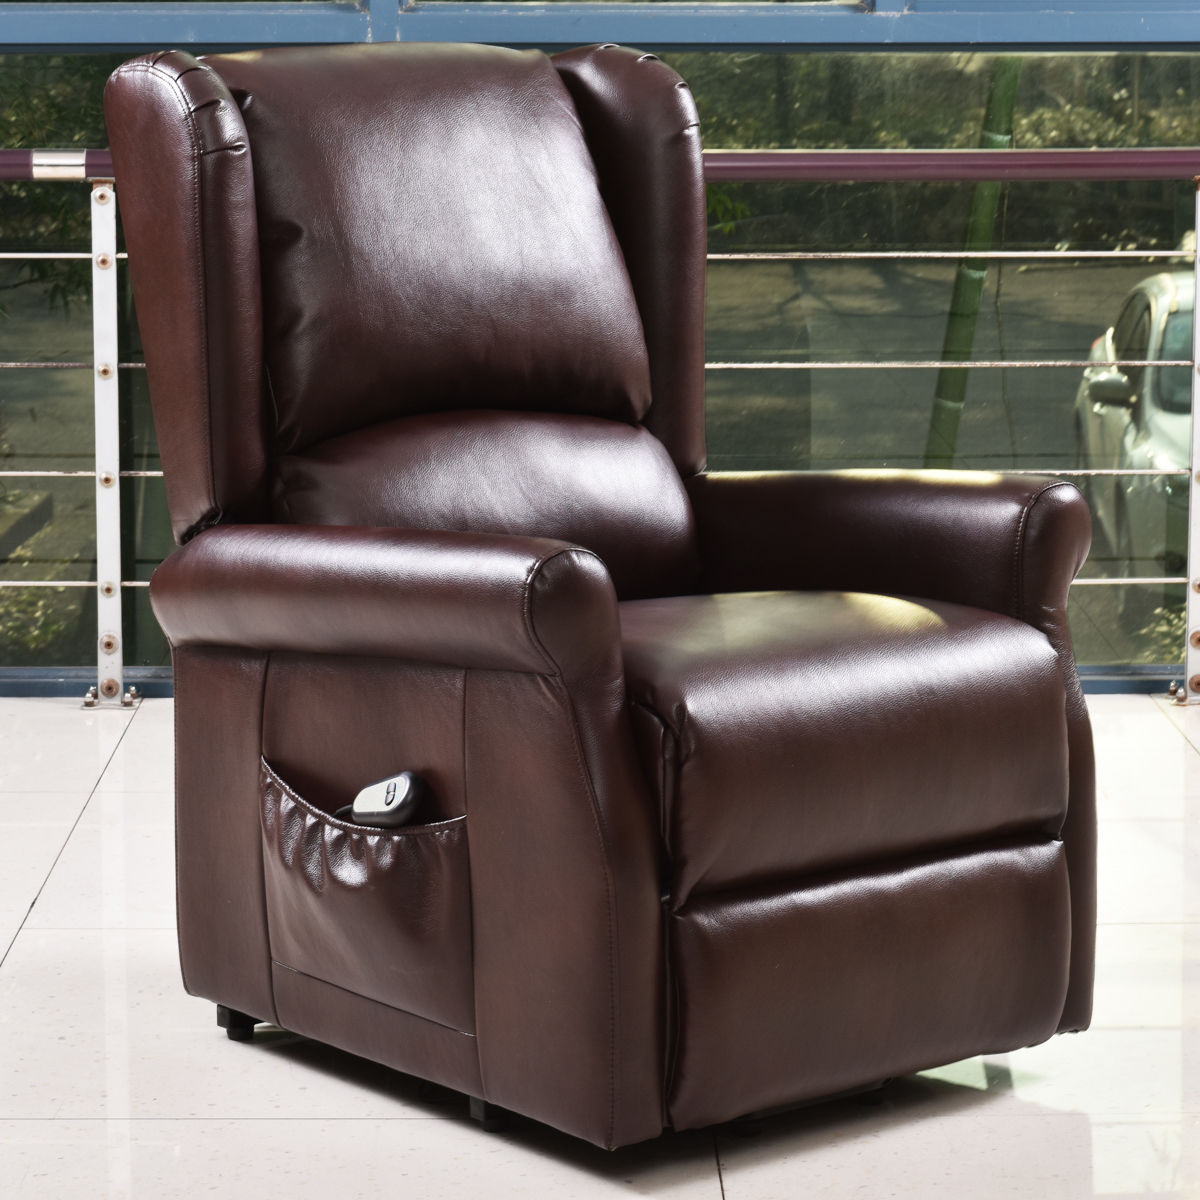 Living Room Chairs Walmart
 Goplus Lift Chair Electric Power Recliners Reclining Chair